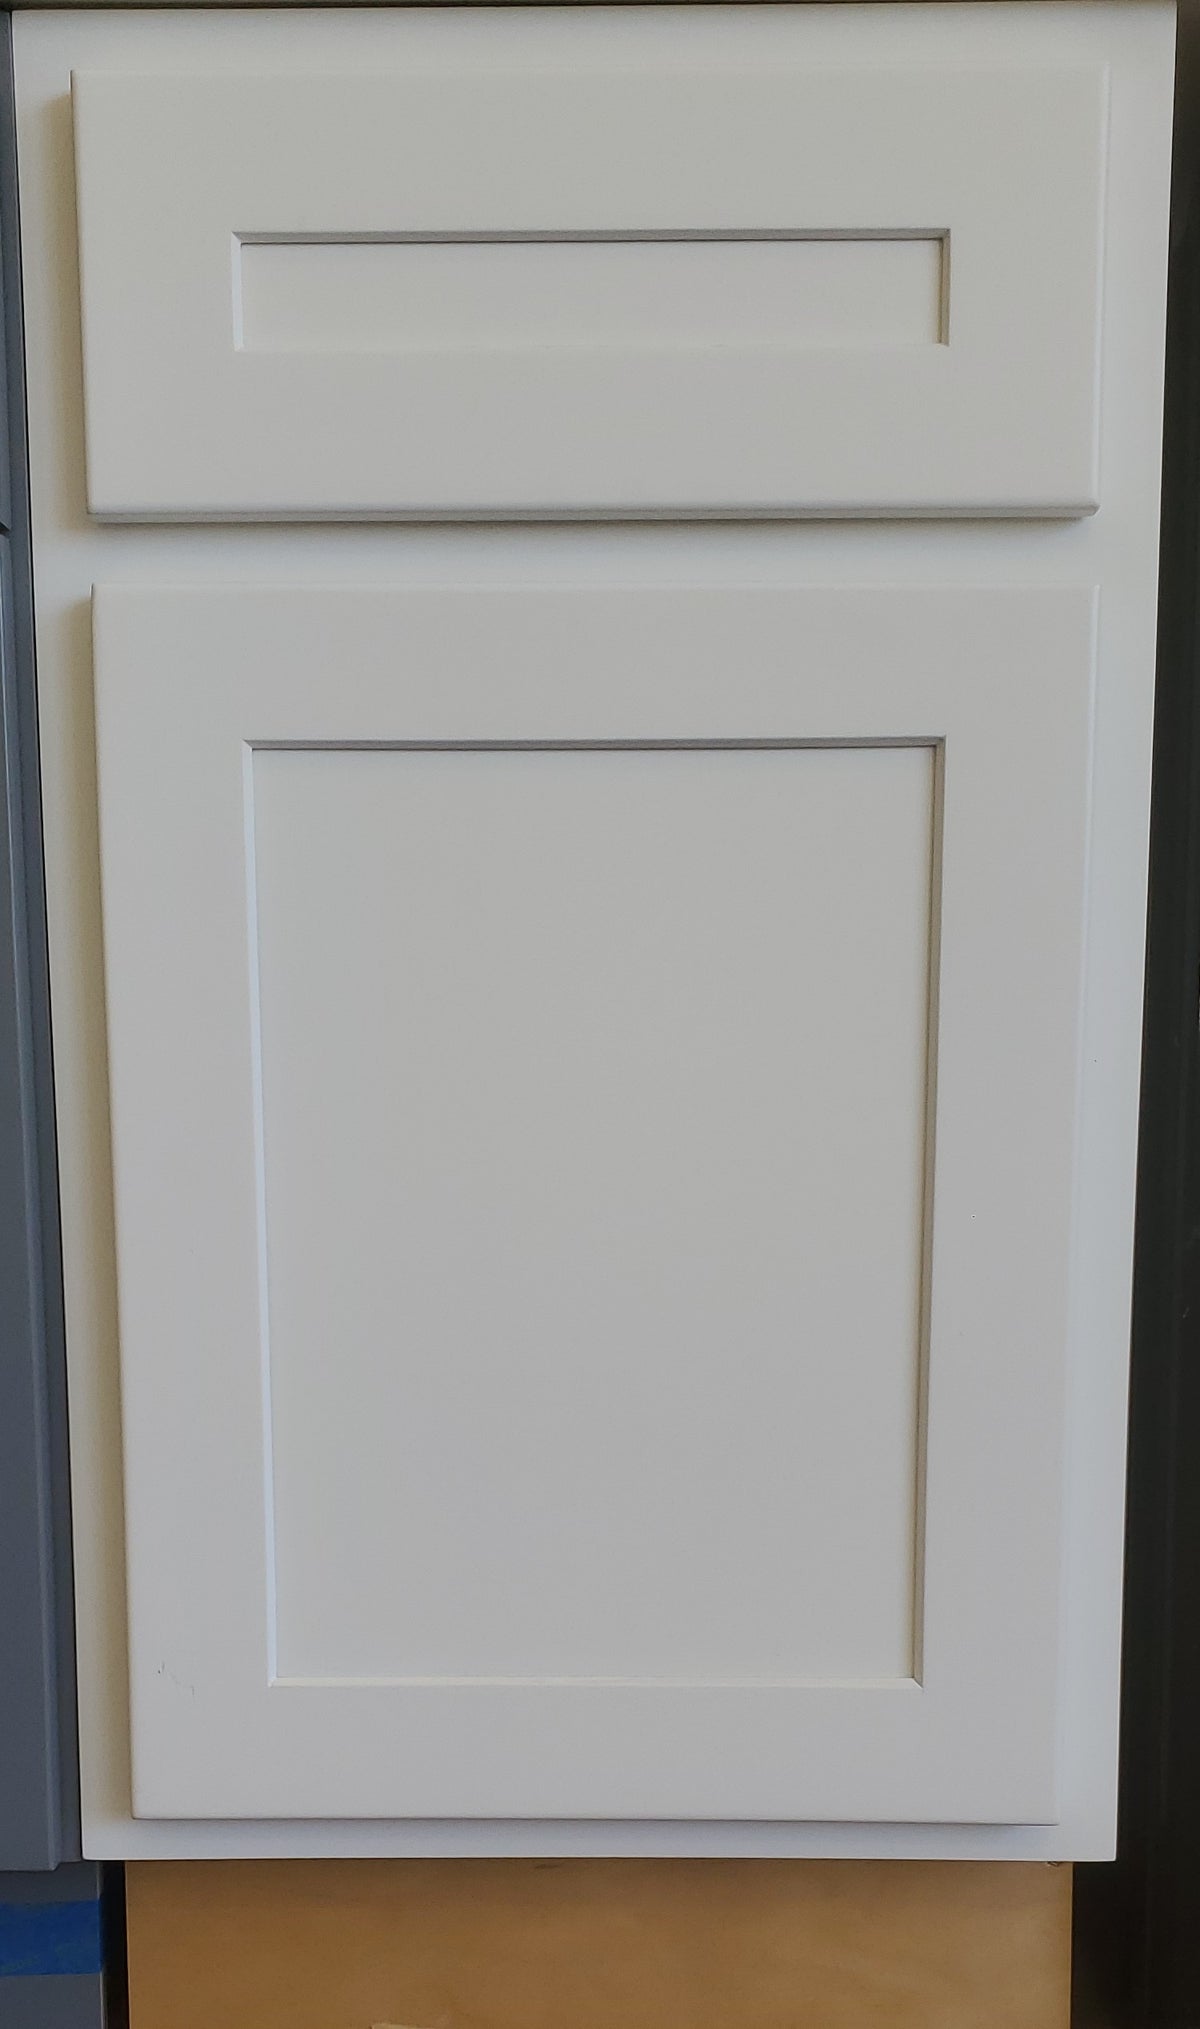 42" tall White Shaker 1/2" Overlay Wall Cabinet - Double Door 24", 27", 30", 33", 36"